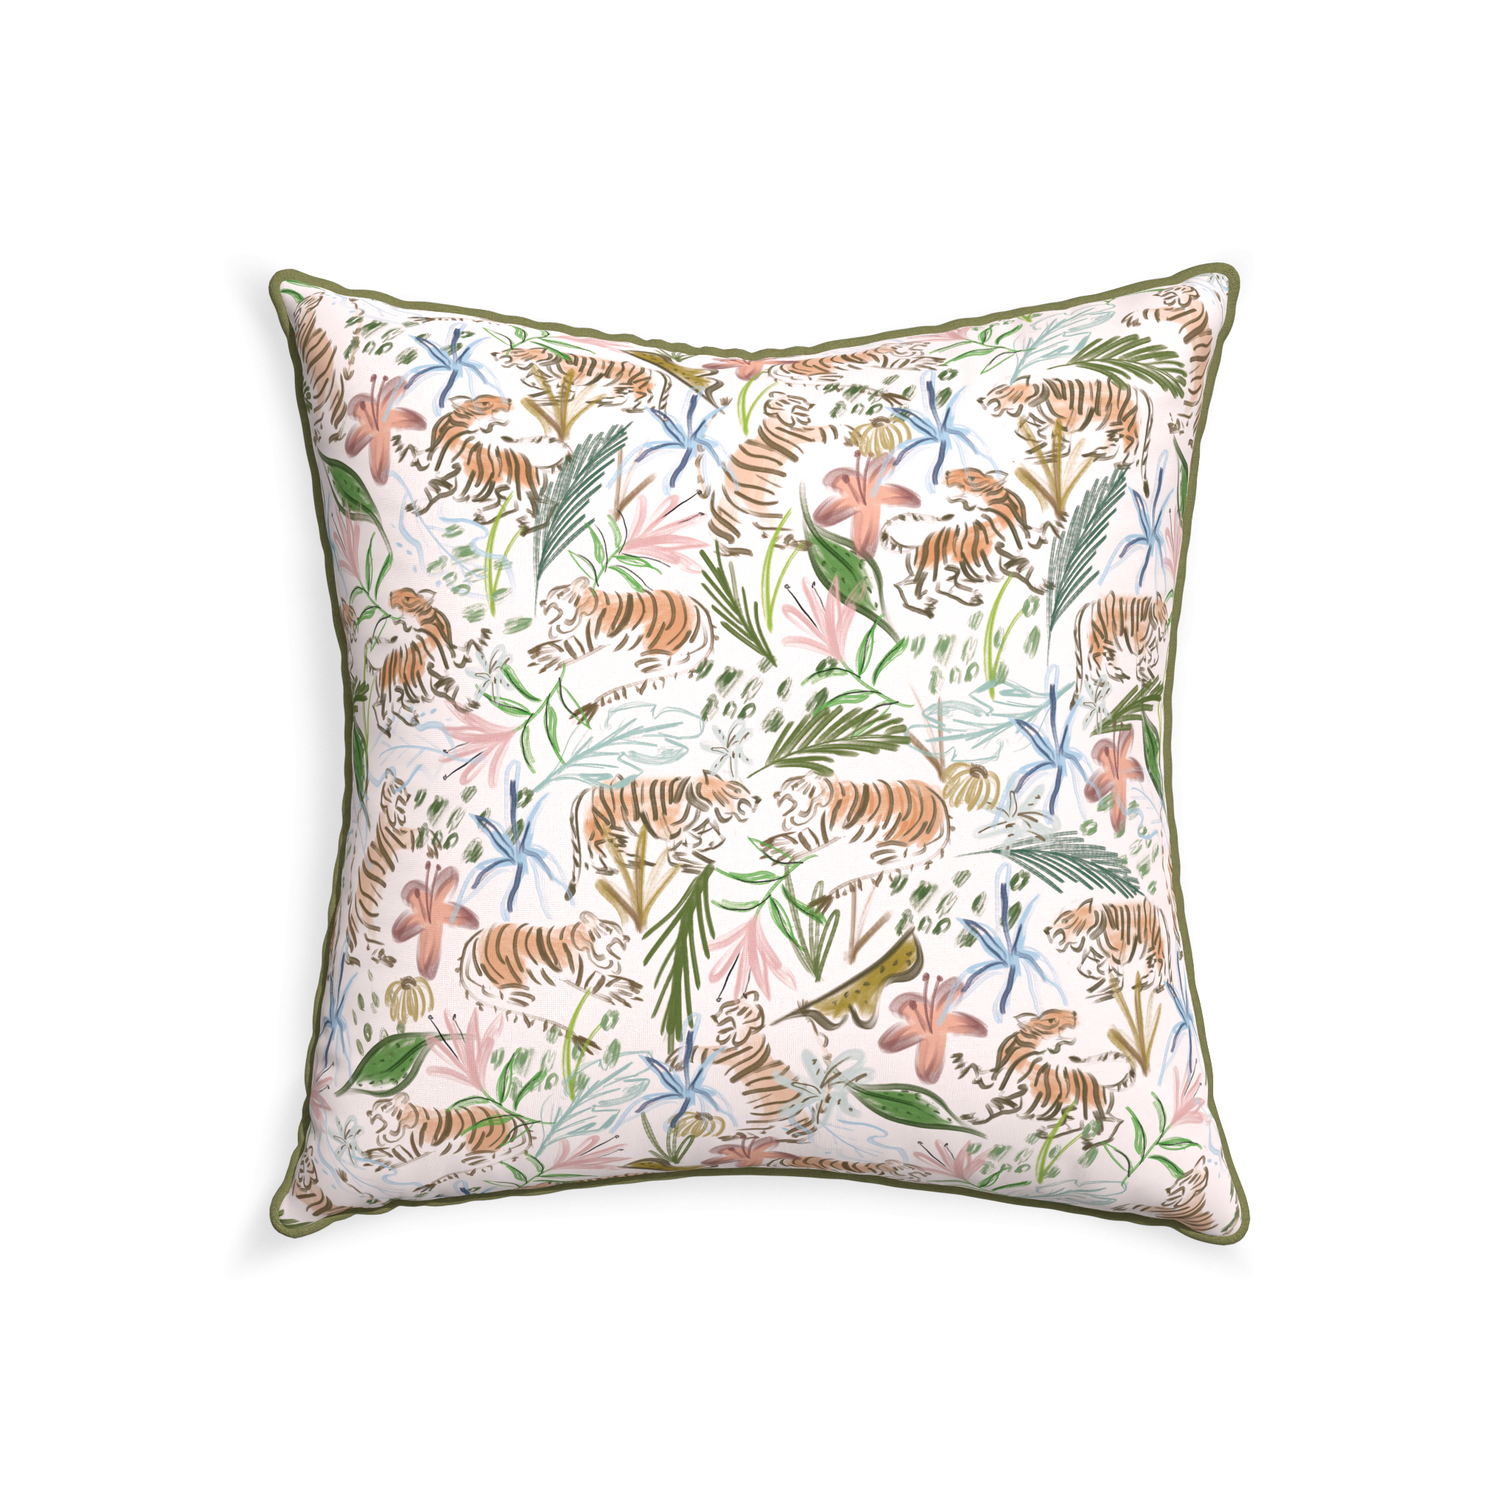 22-square frida pink custom pink chinoiserie tigerpillow with moss piping on white background